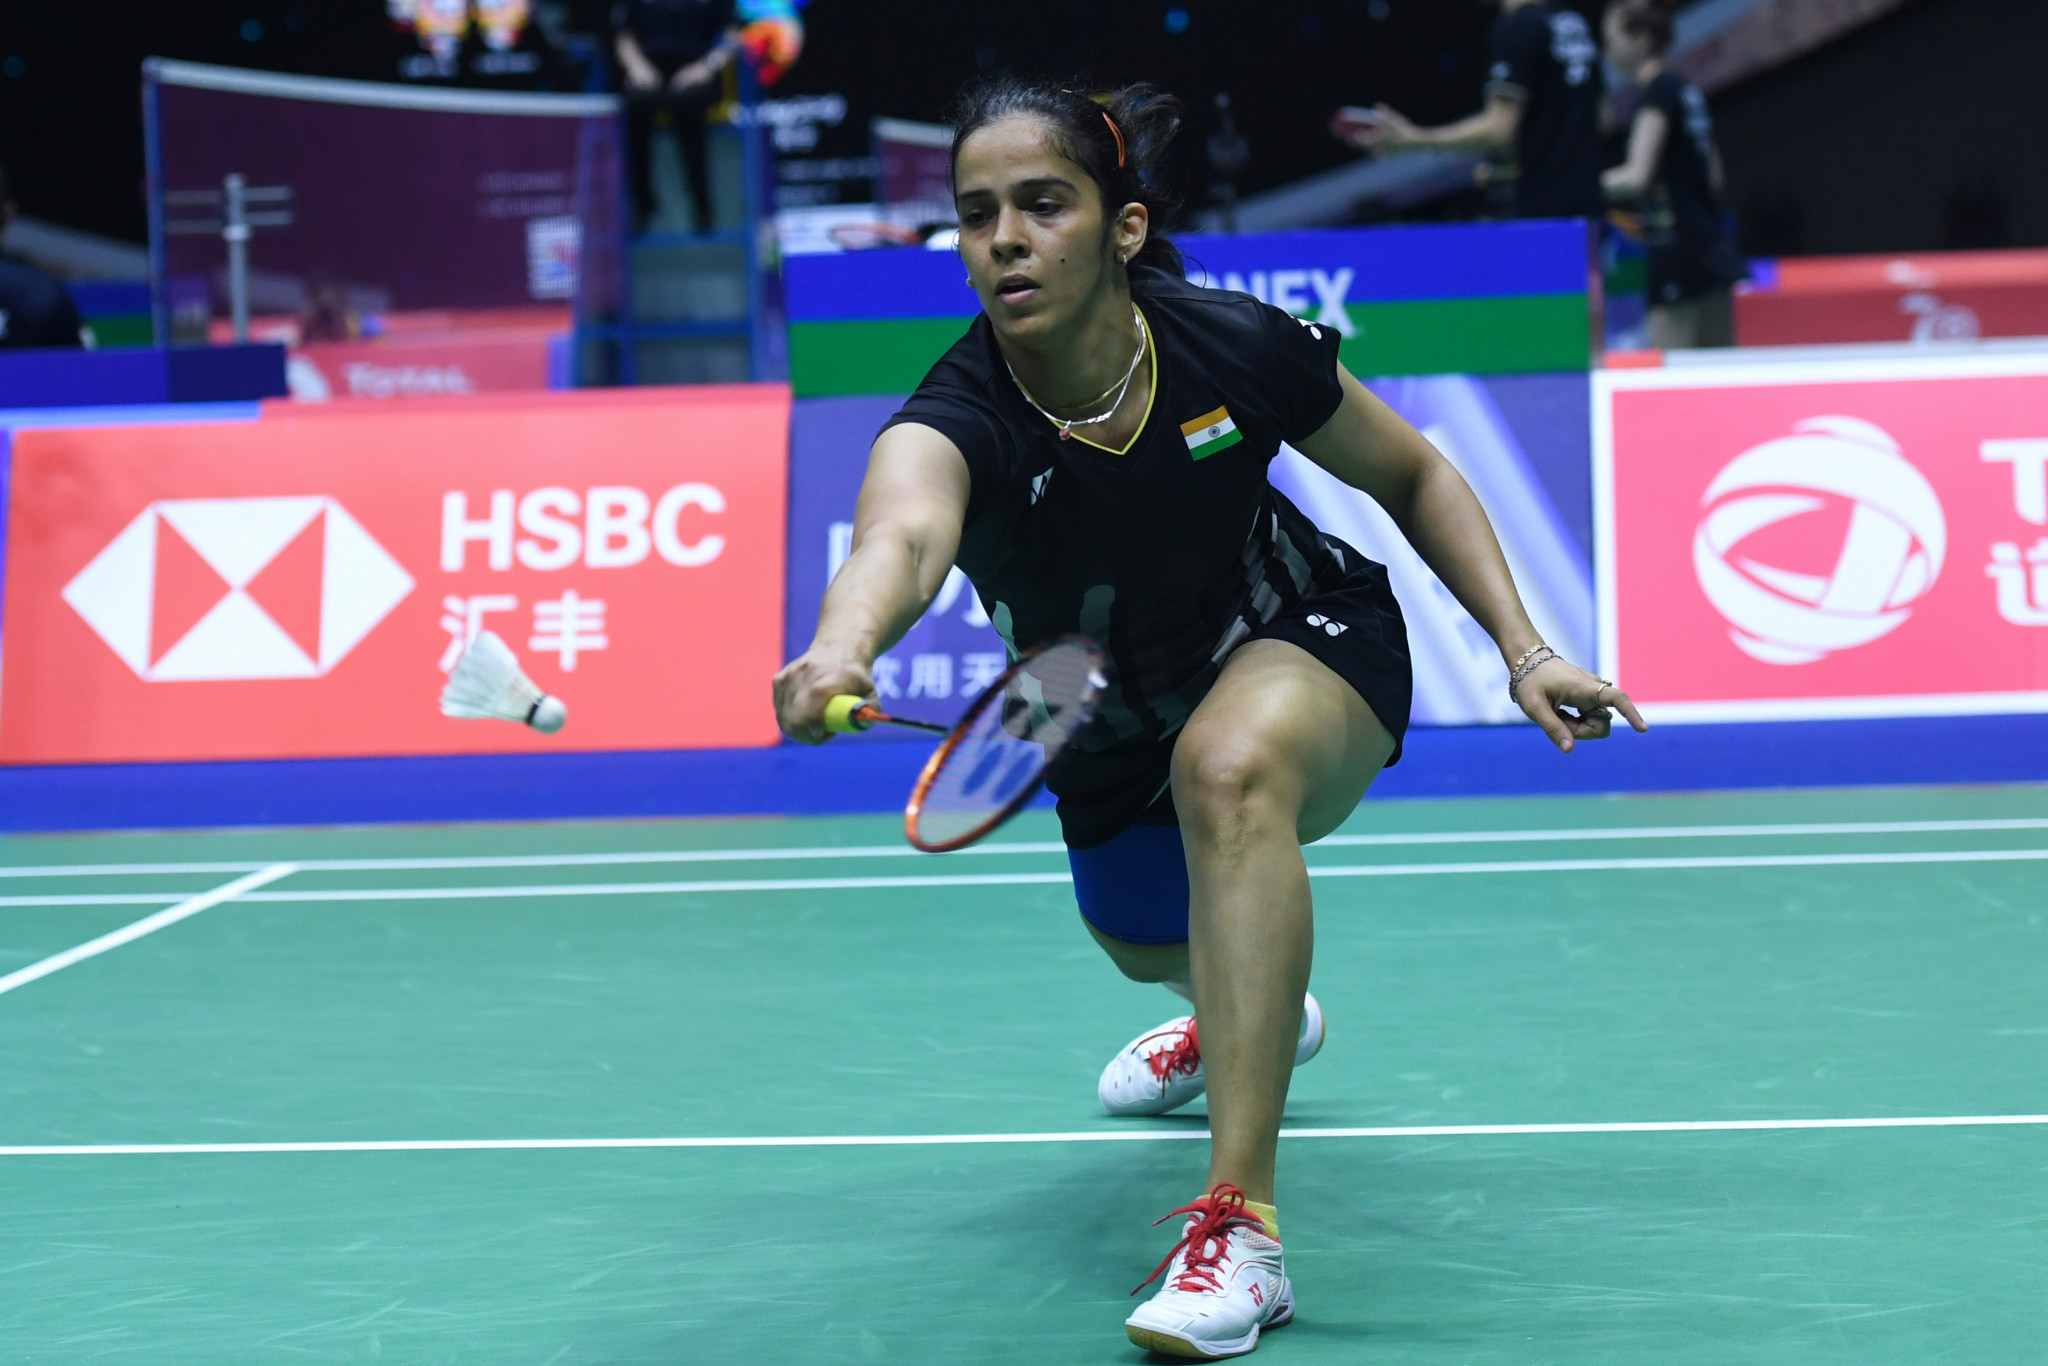 The postponement is a blow to Saina Nehwal's prospects of Olympic qualification ©Getty Images